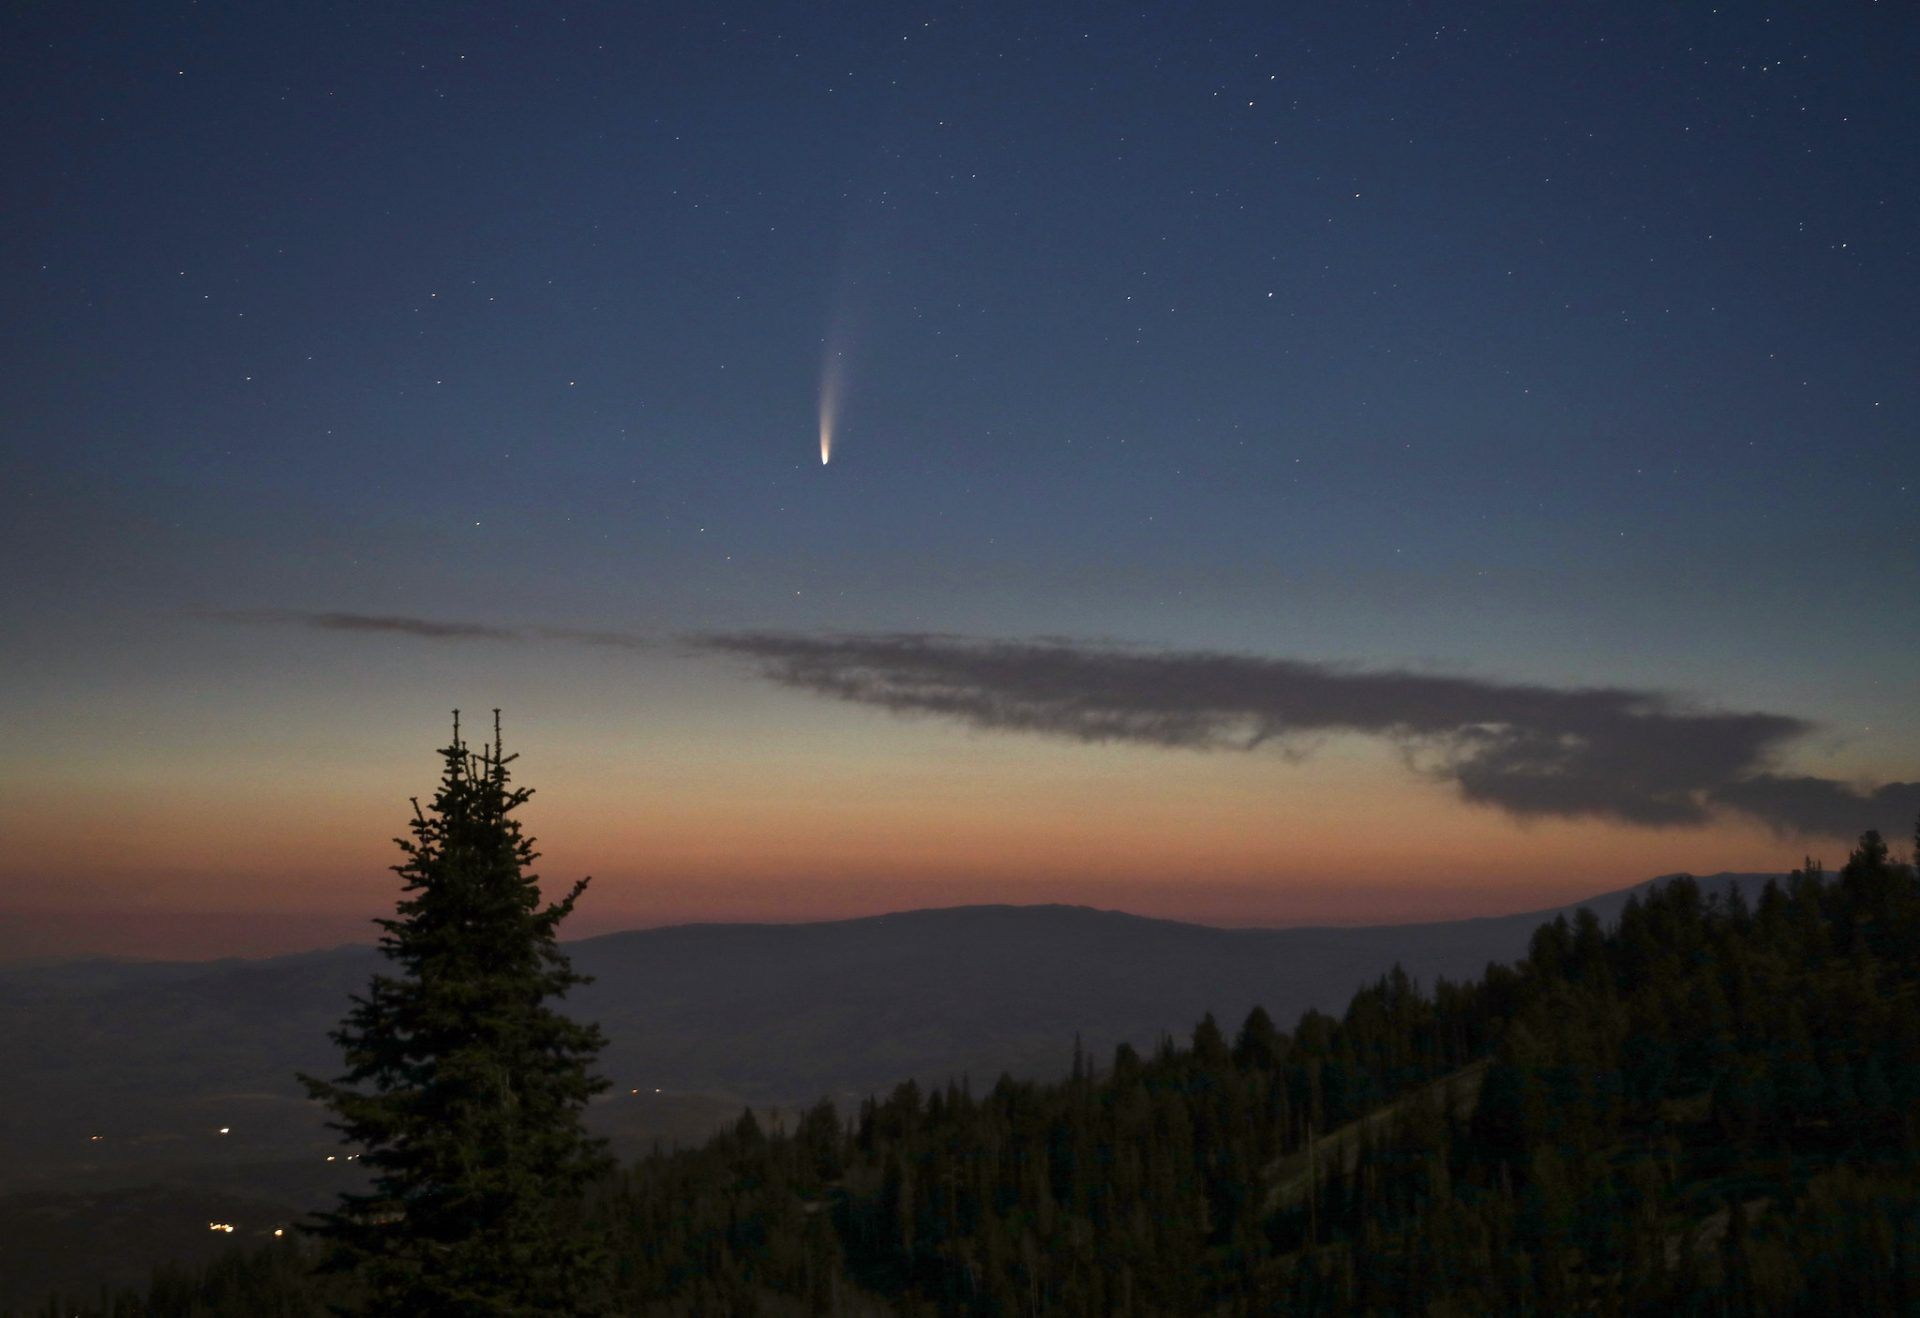 How to photograph Comet NEOWISE: NASA tips for stargazers